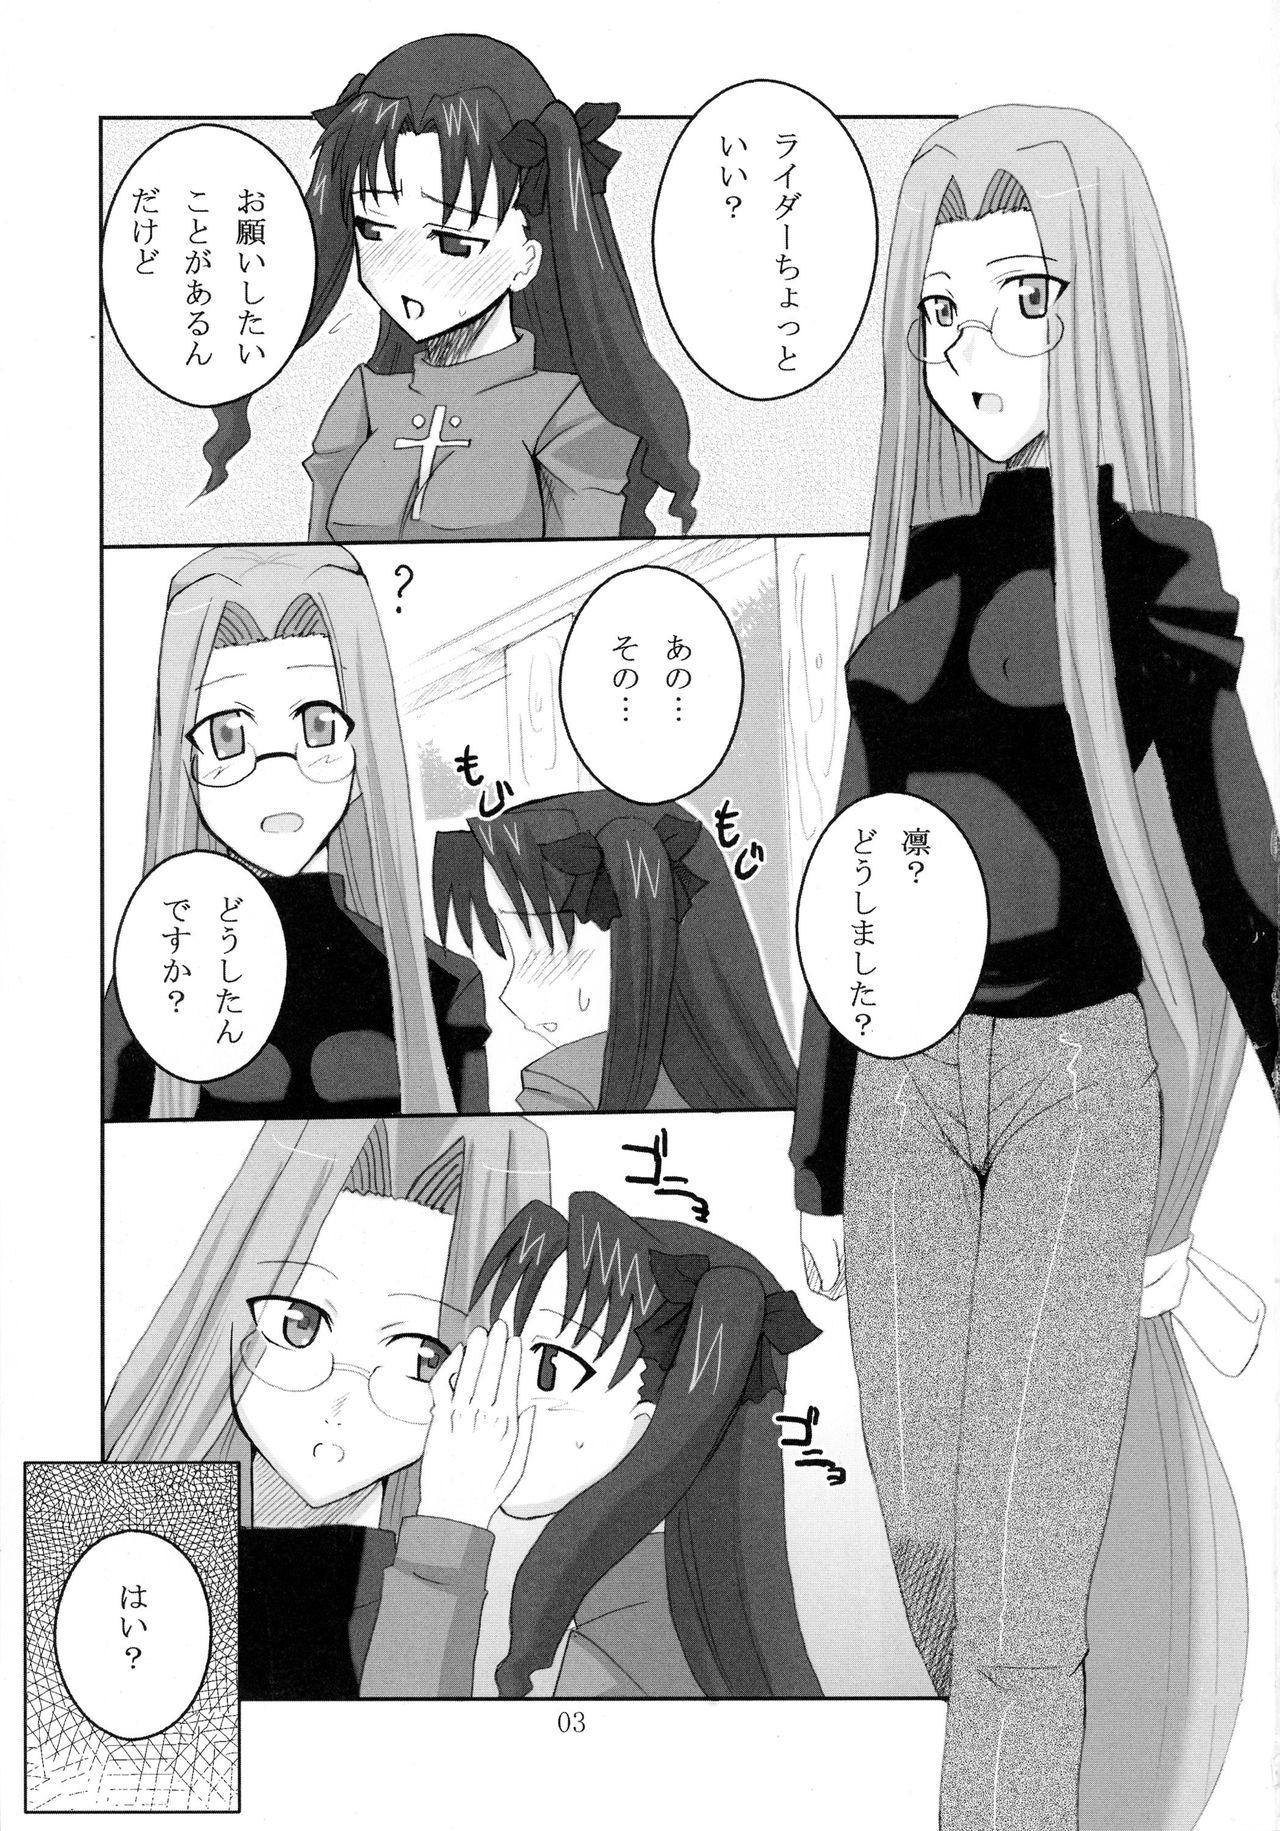 Relax vain dream - Fate stay night Collar - Page 3